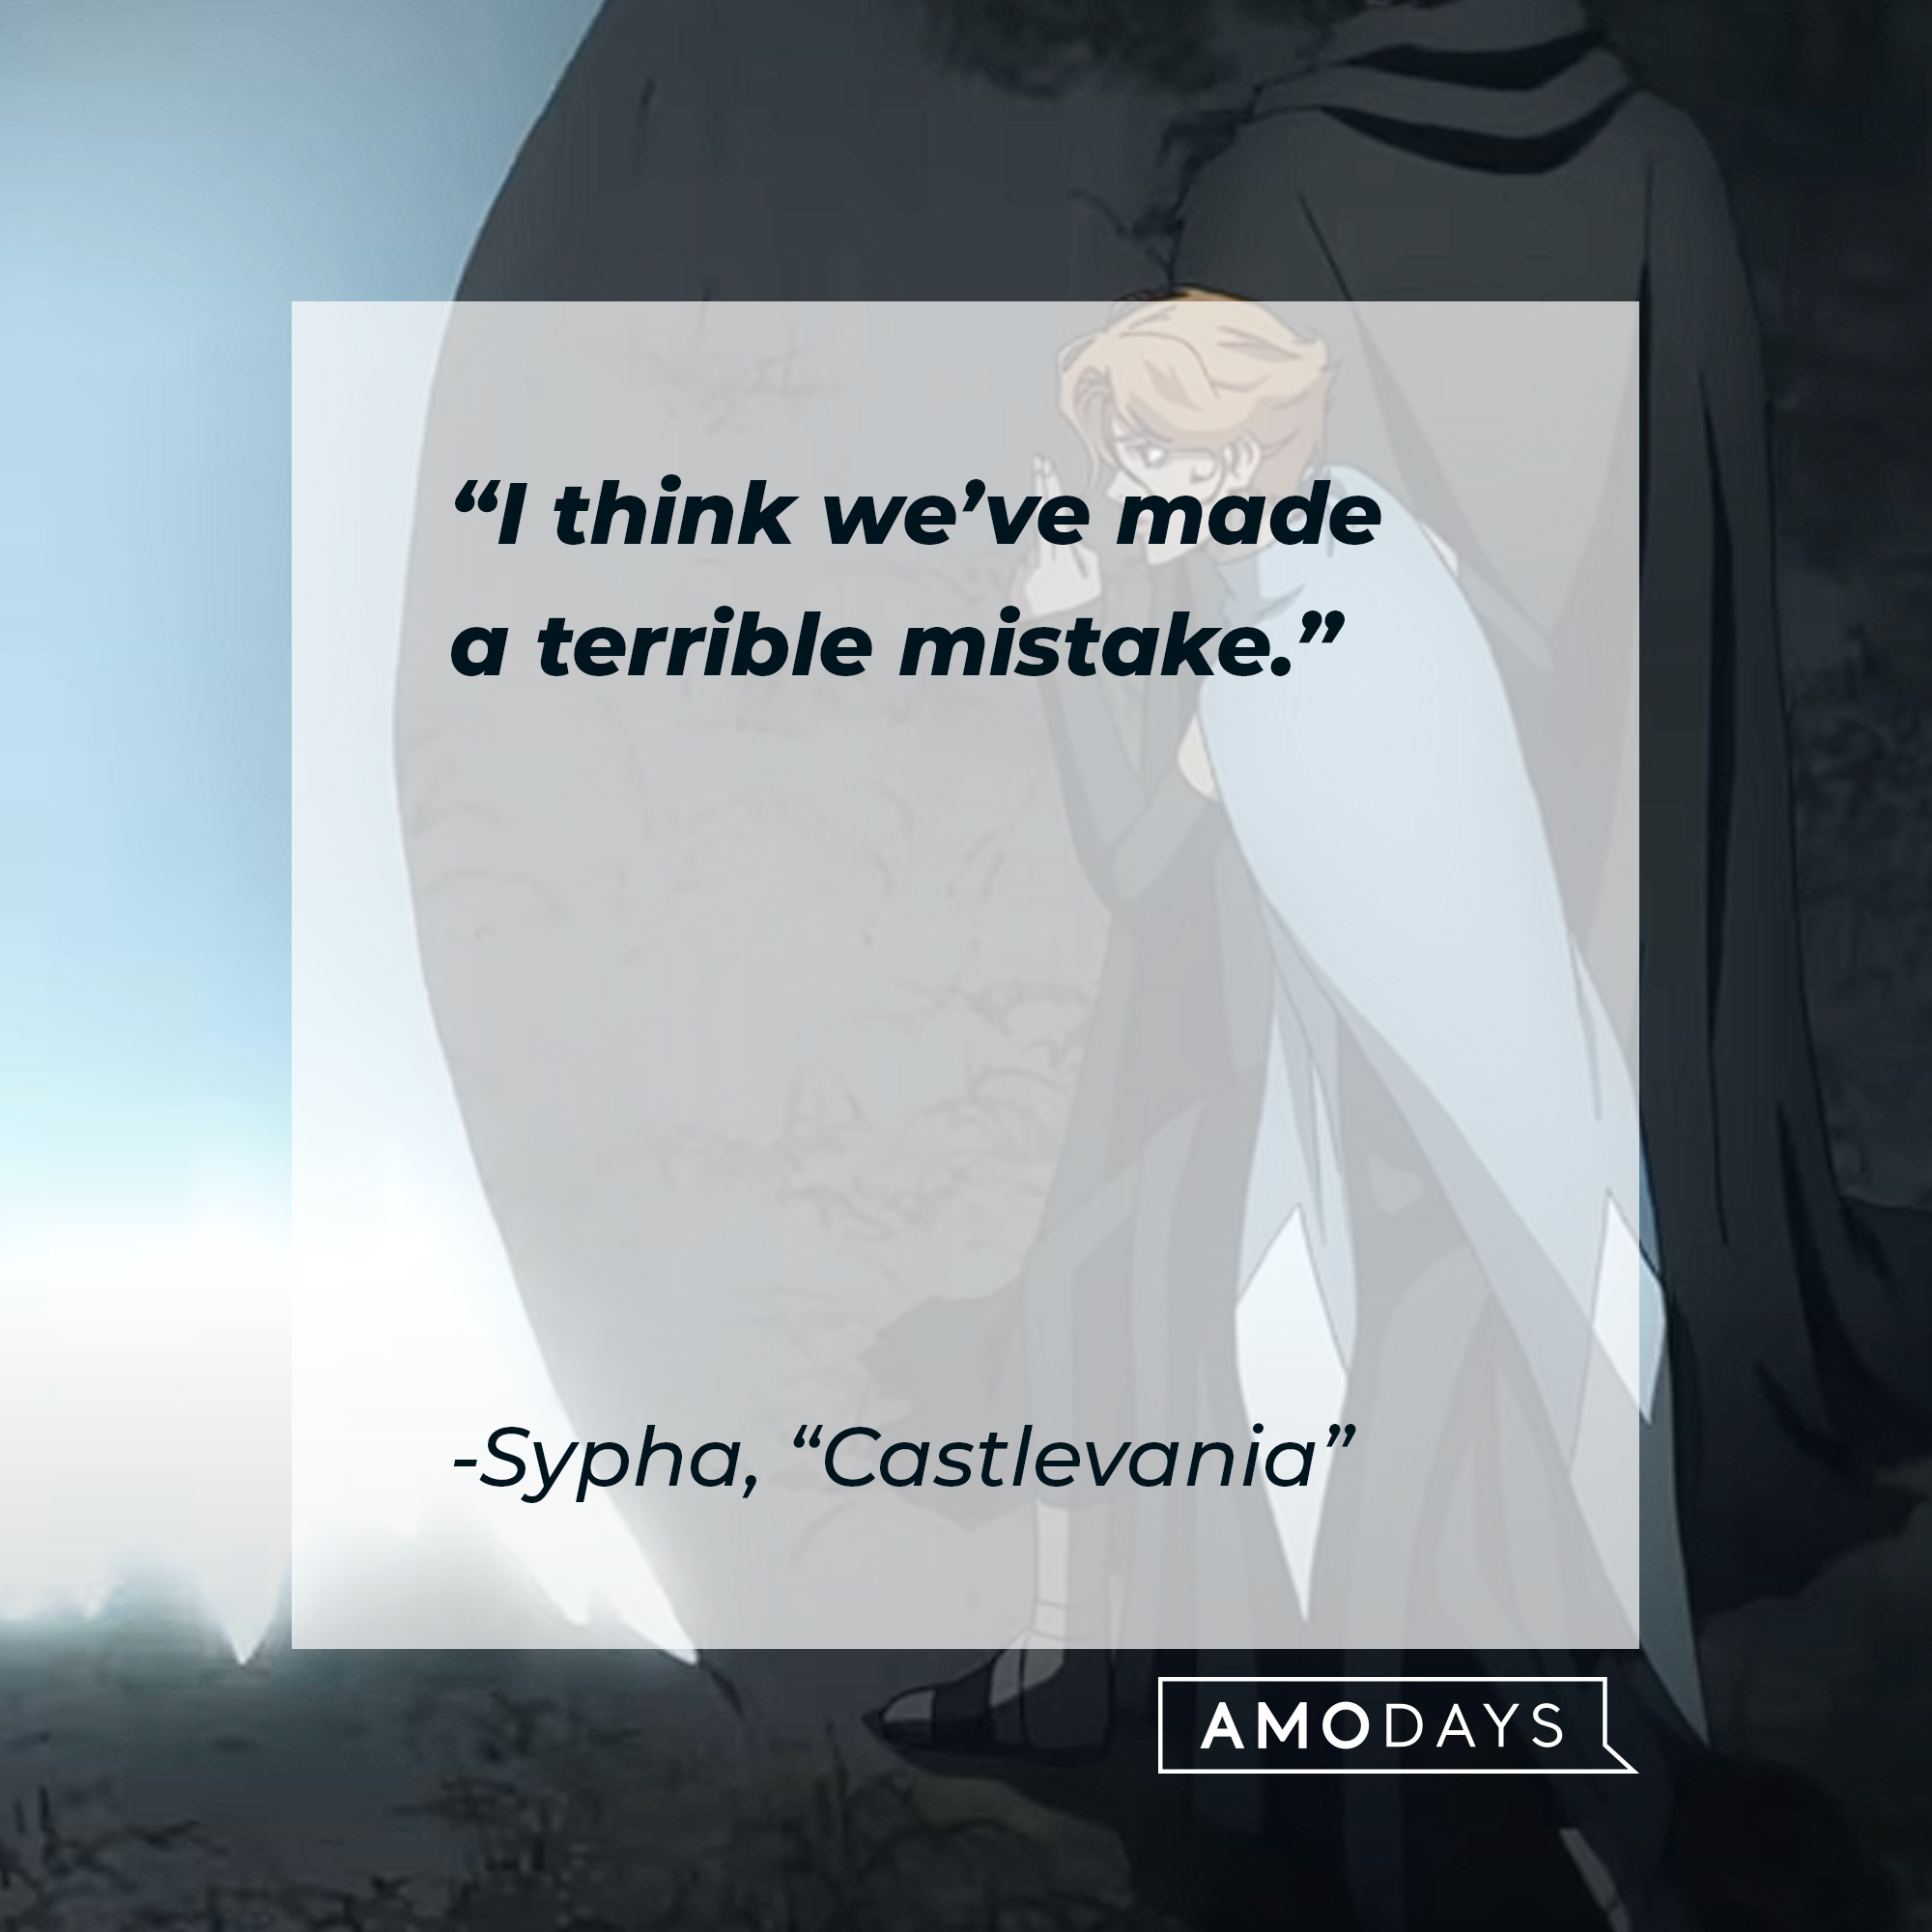 Sypha's quote from "Castlevania:" “I think we’ve made a terrible mistake.” | Source: Youtube.com/Netflix